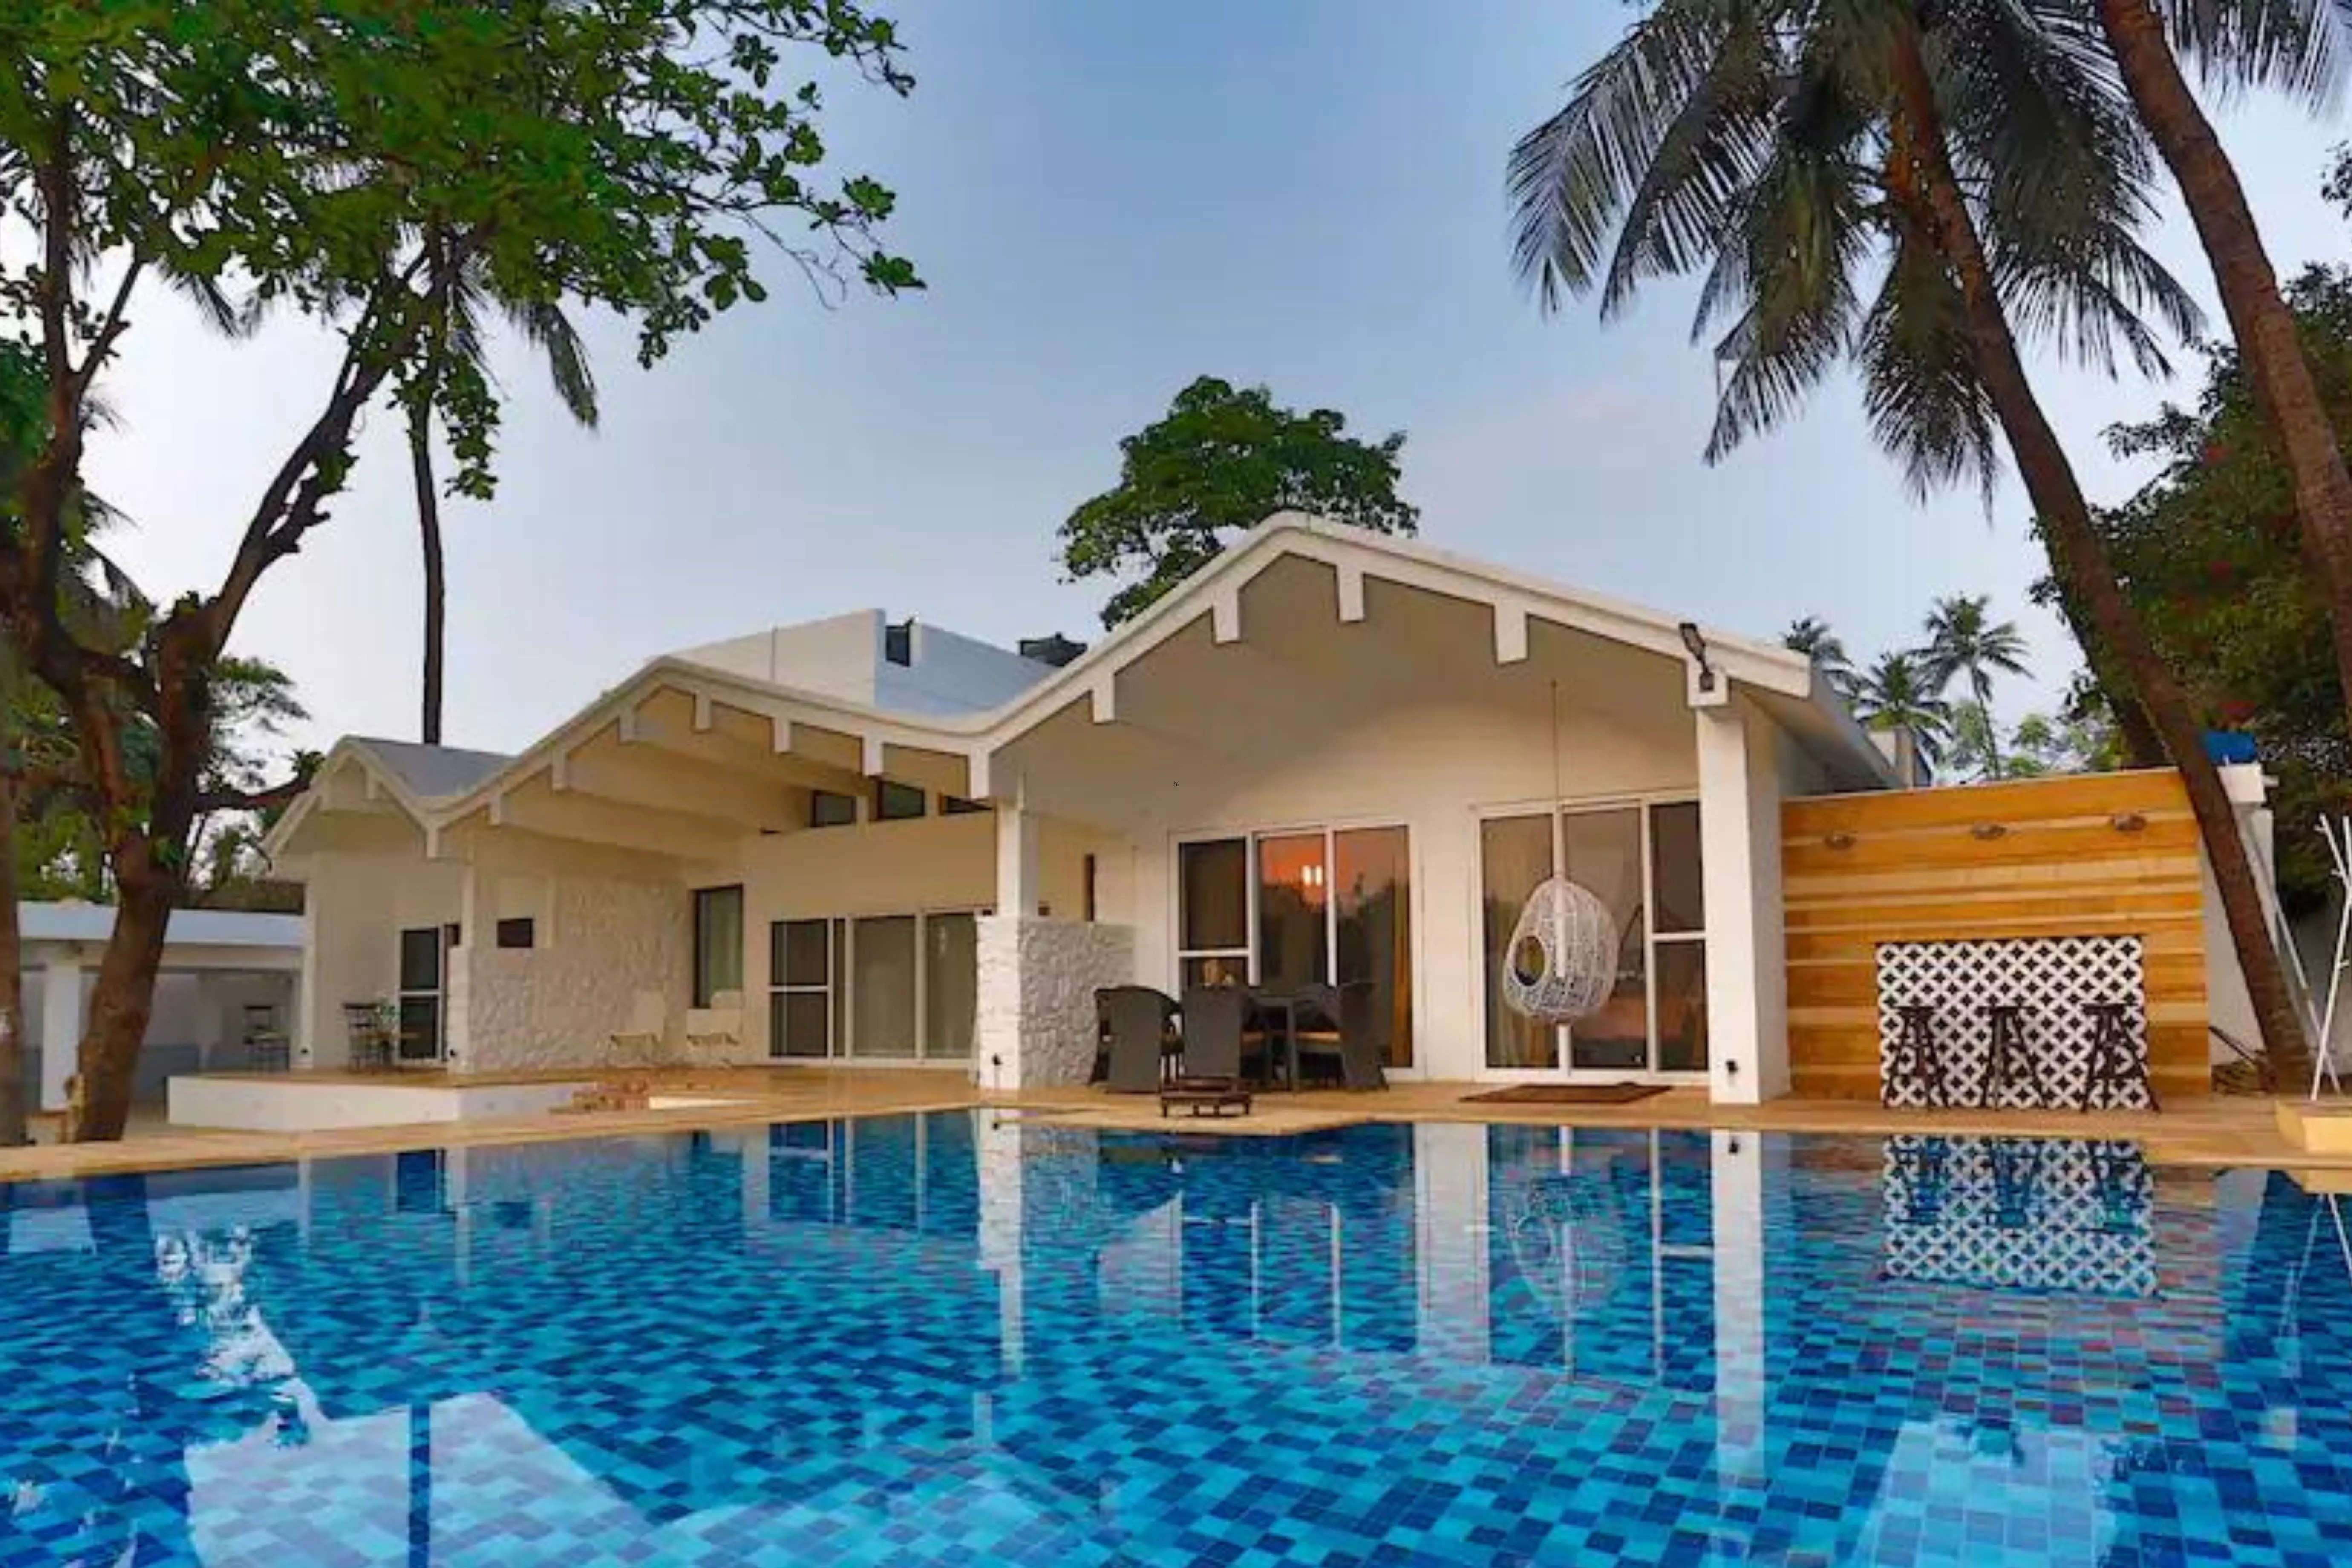 Yuvraj Singh lists his Goa-home on Airbnb, joins other Indian celebrities as host